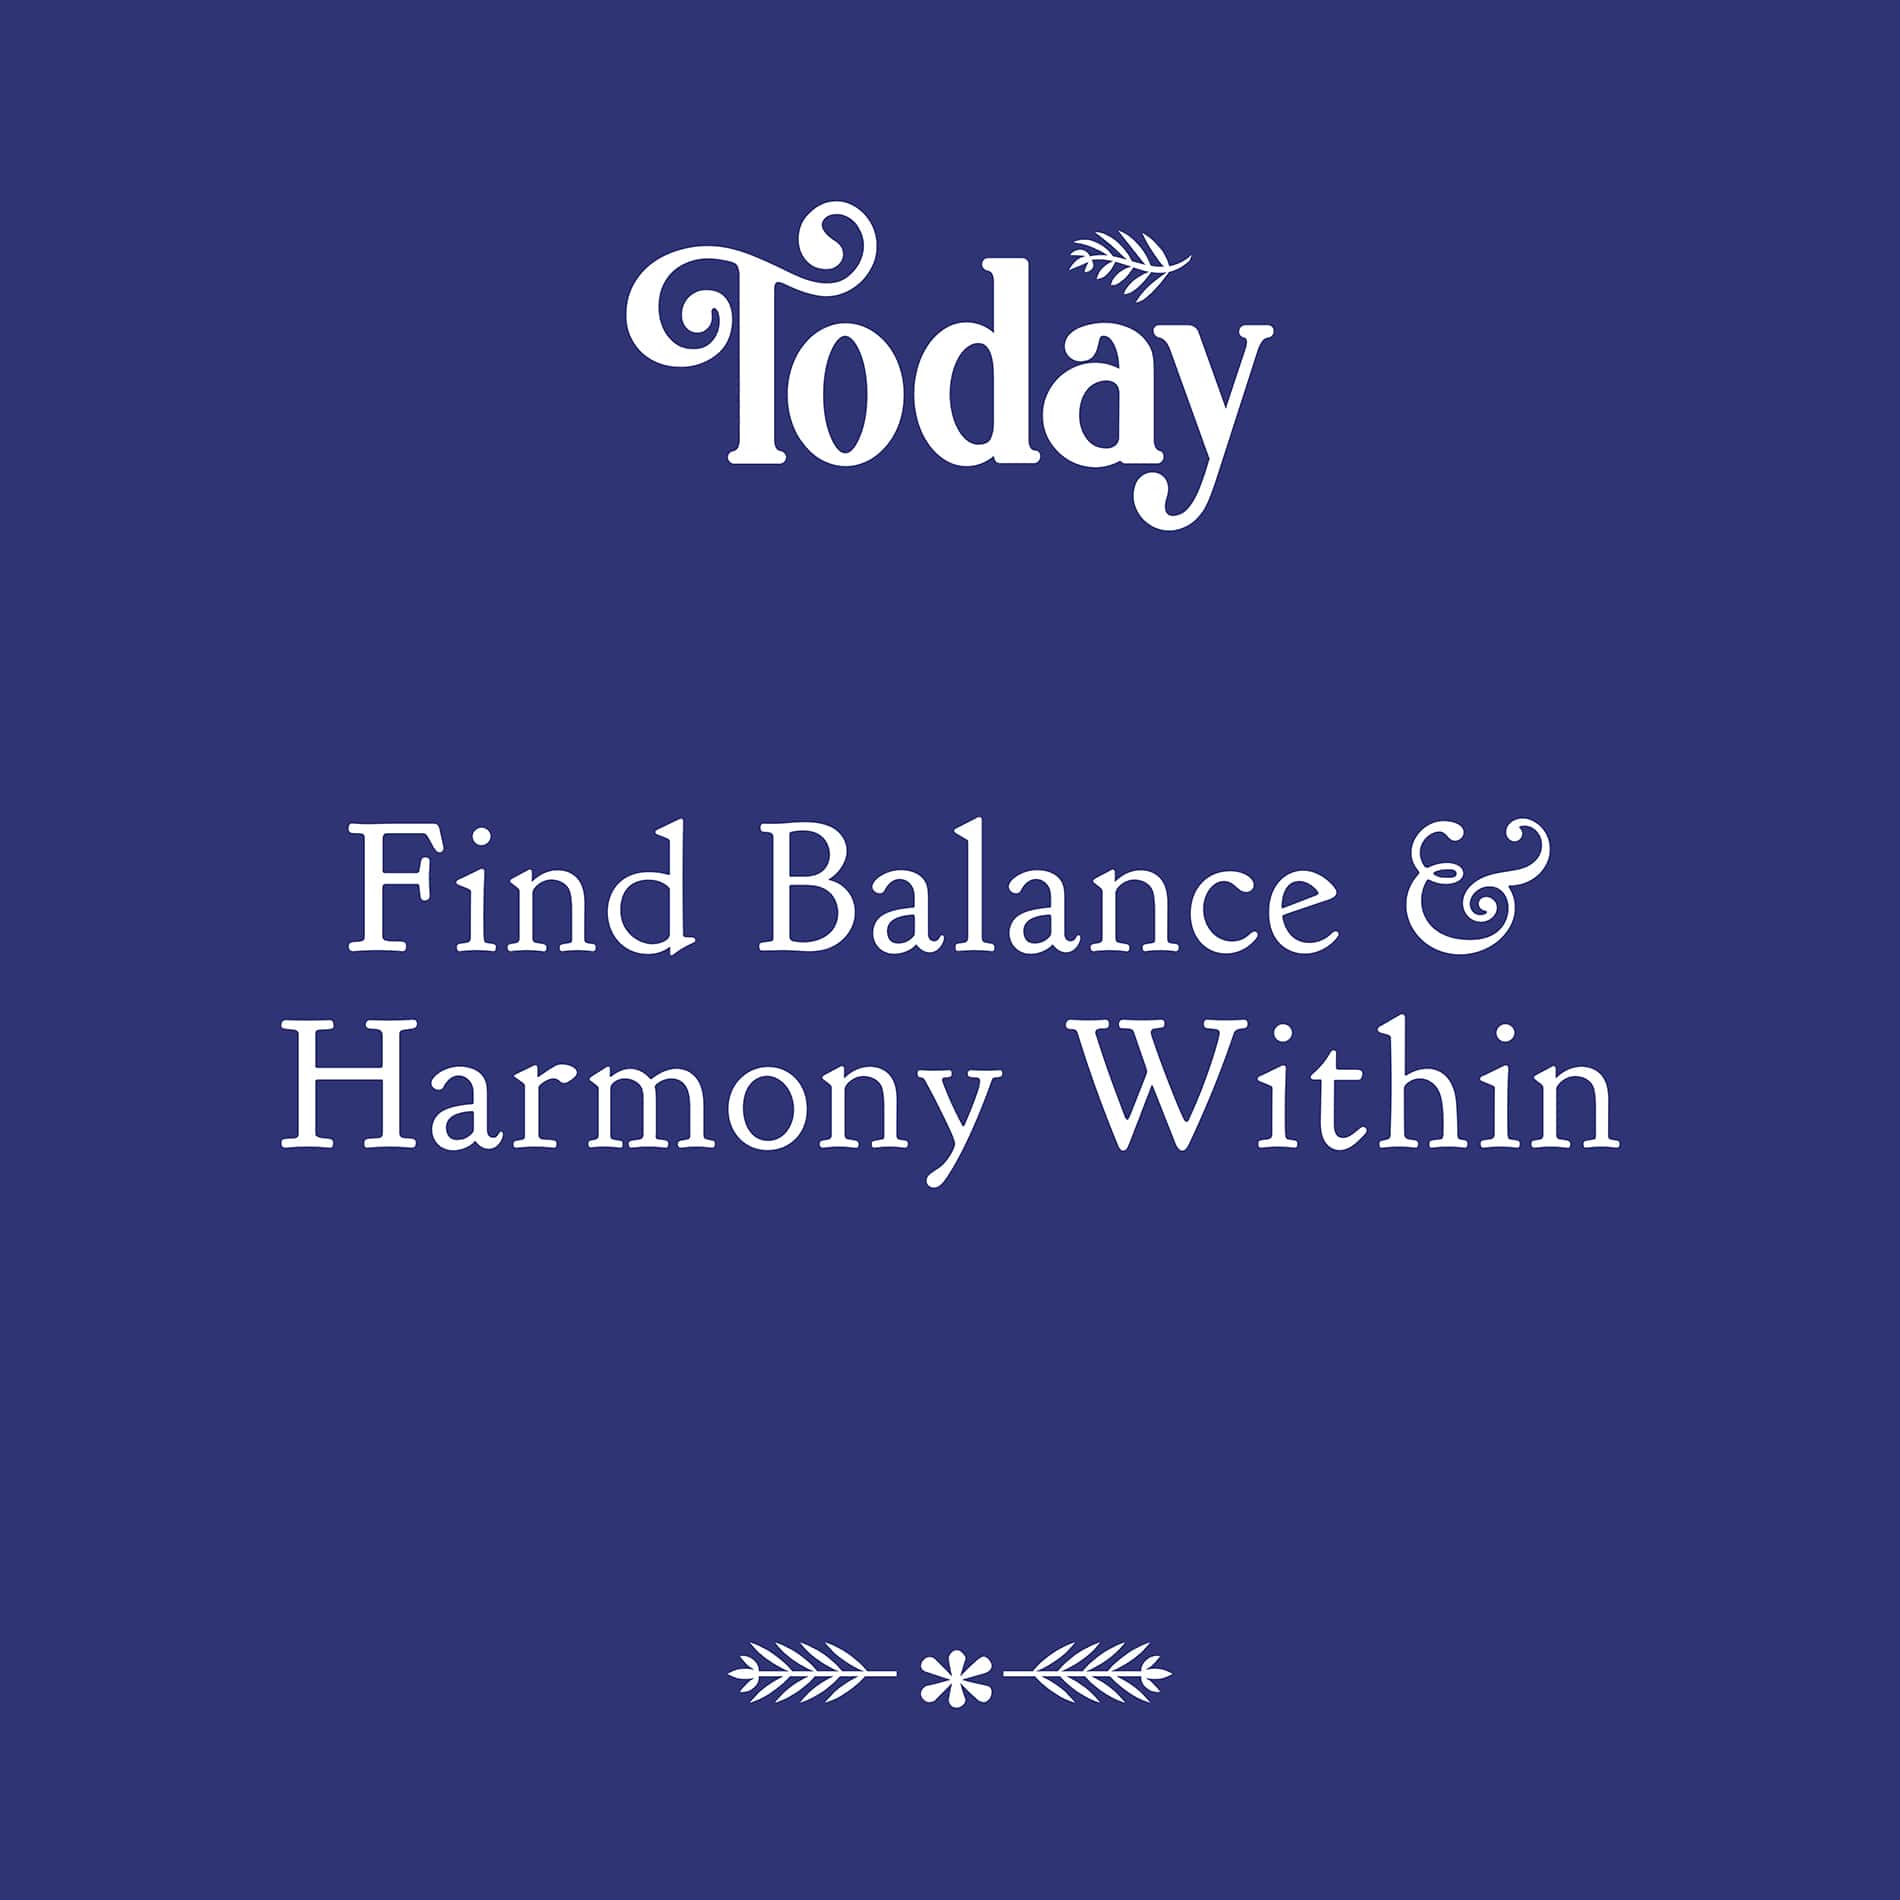 Today - Find balance & Harmony within